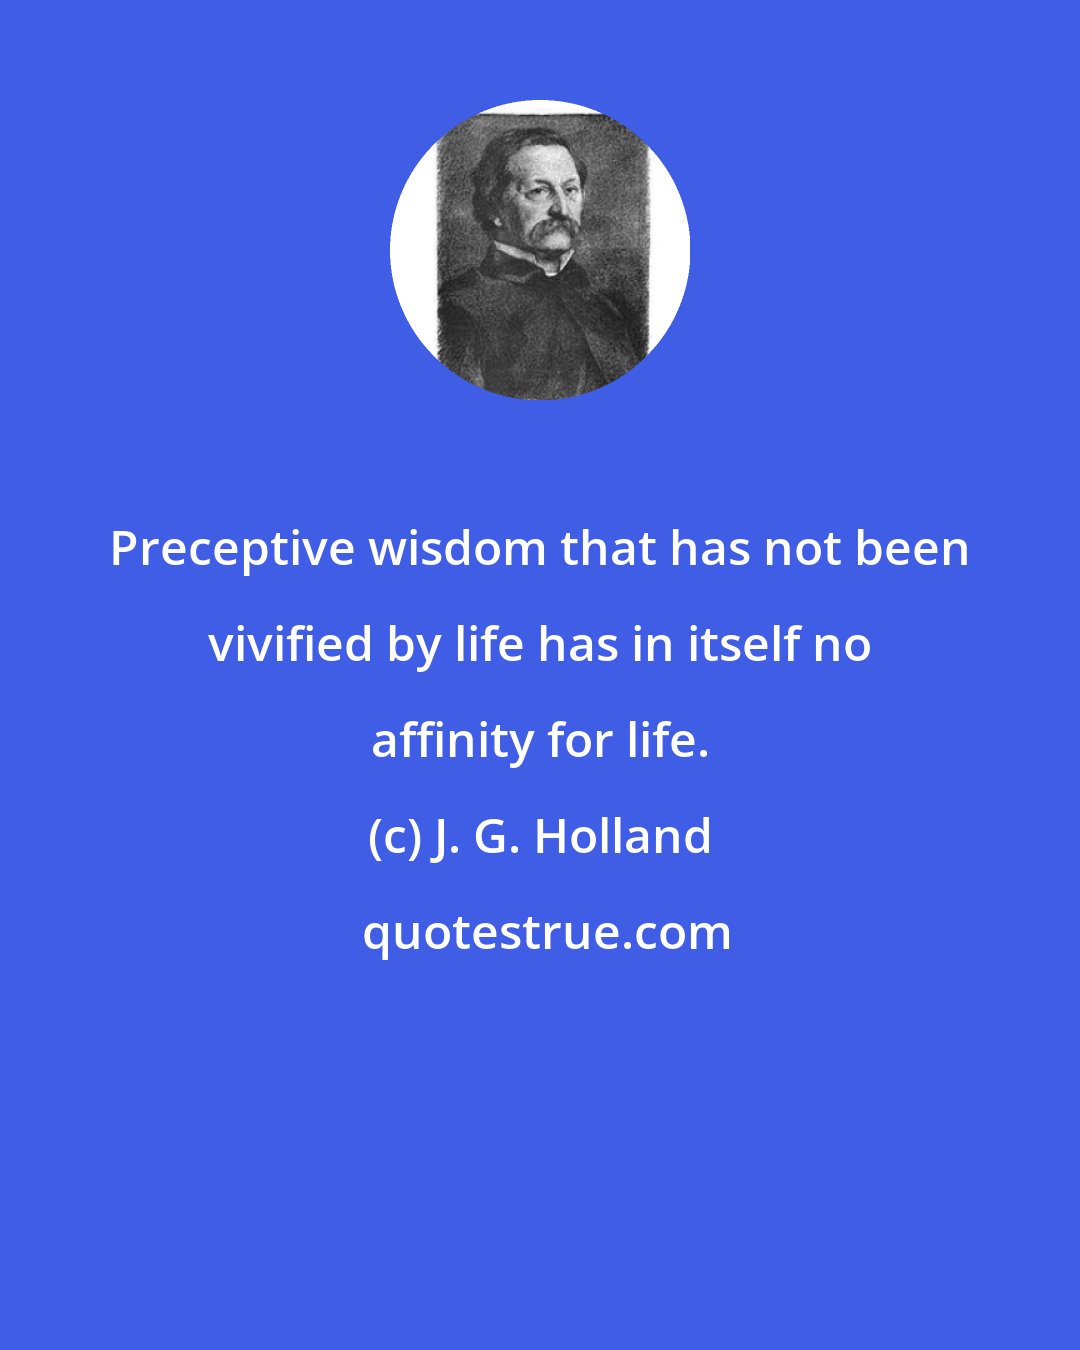 J. G. Holland: Preceptive wisdom that has not been vivified by life has in itself no affinity for life.